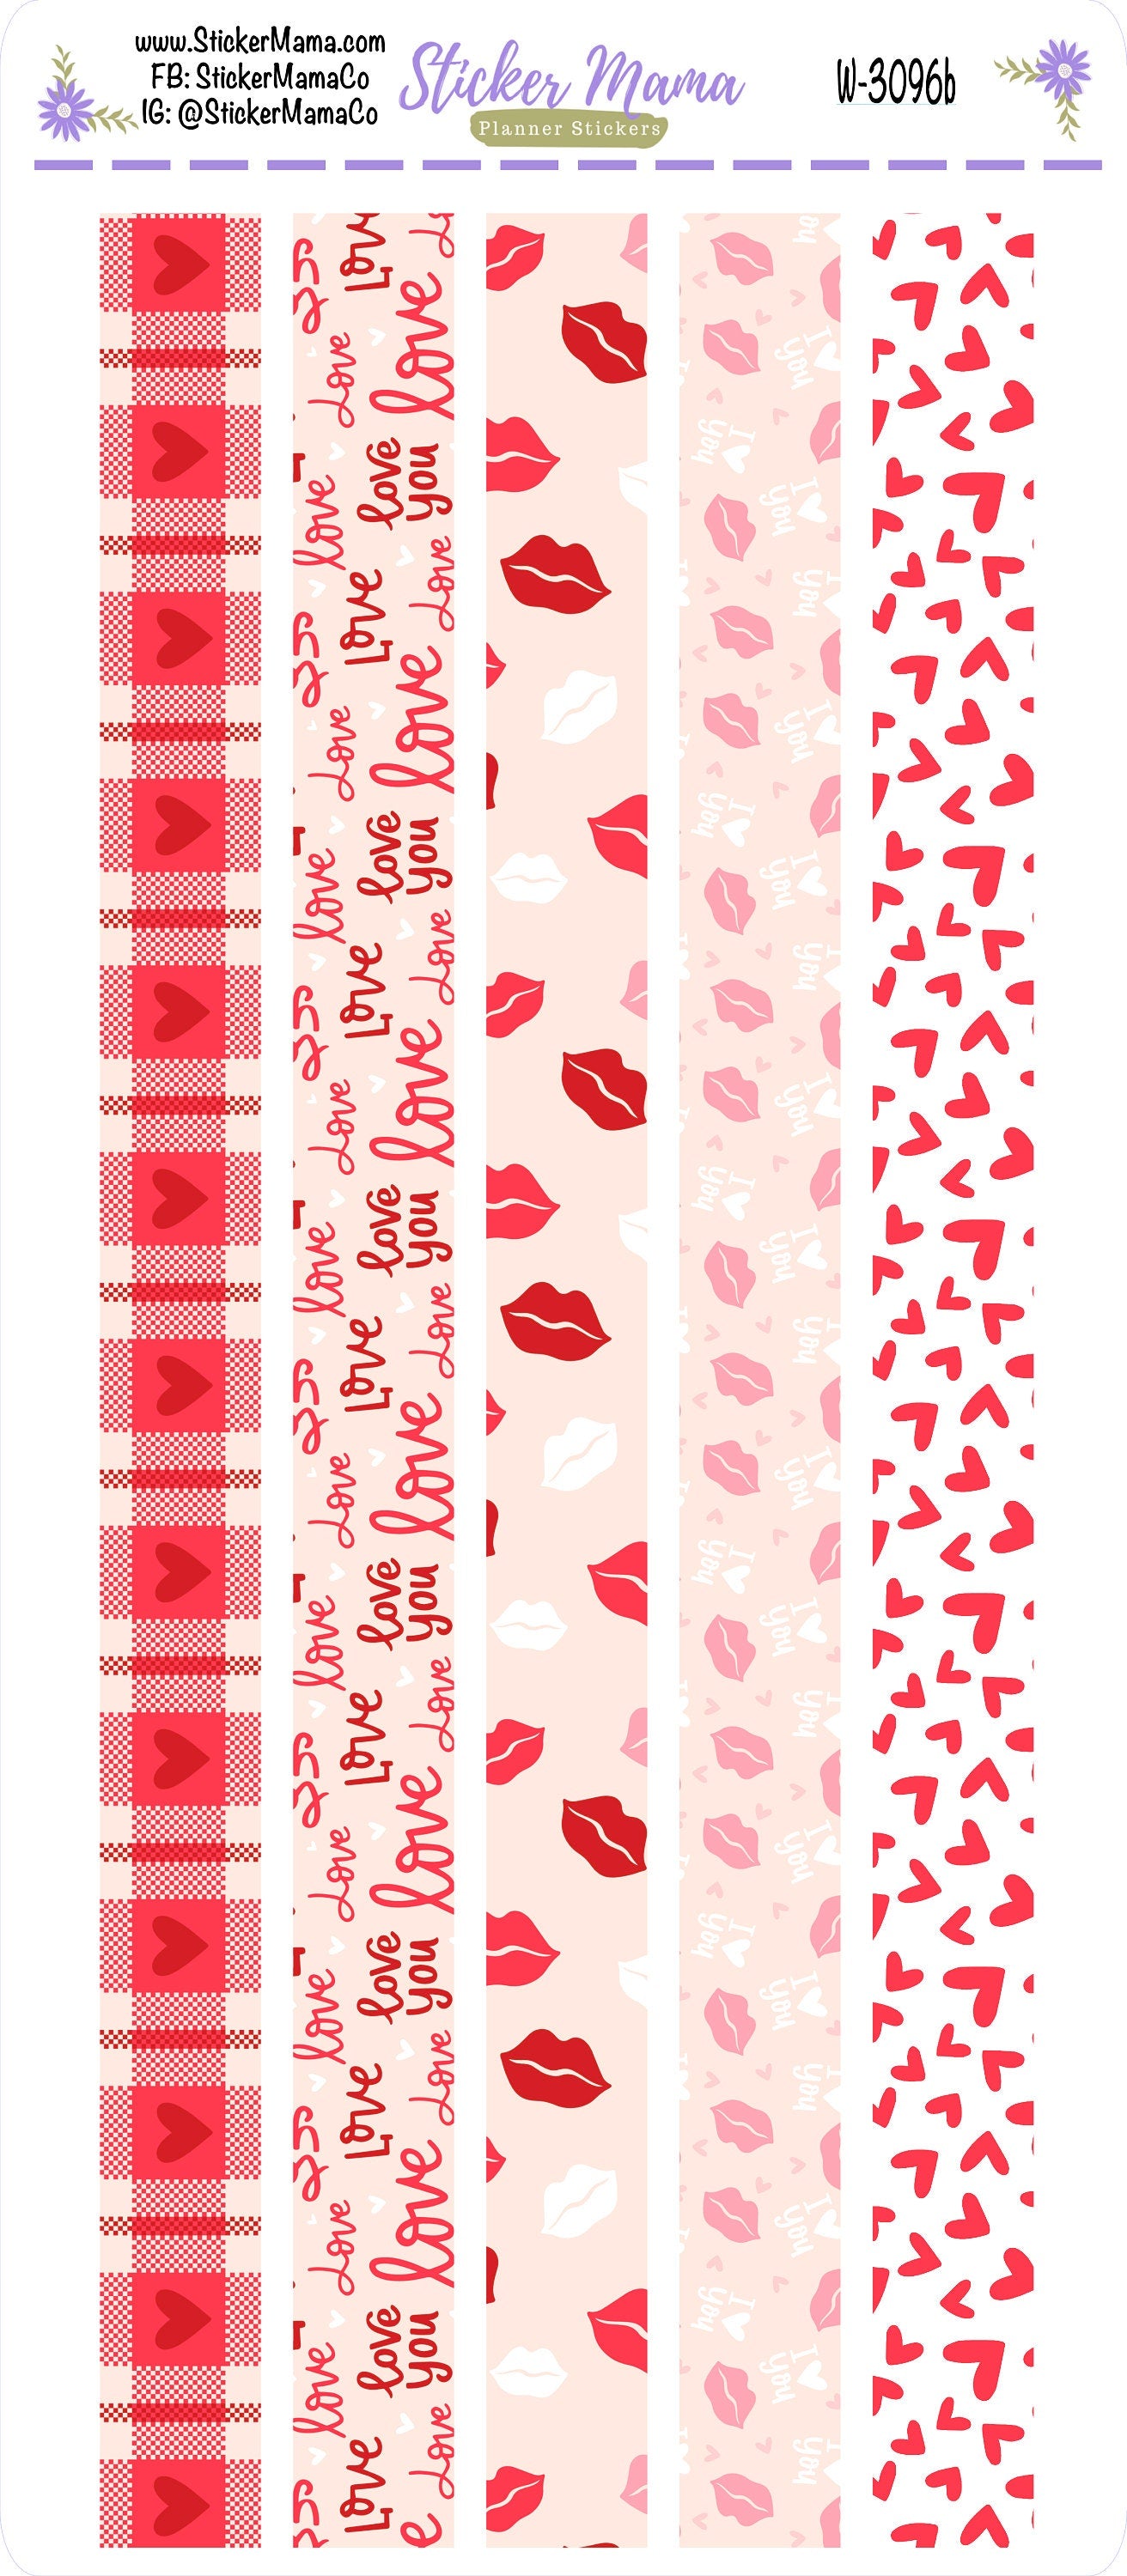 W-3096- Hearts 'n Kisses Washi Stickers || Planner Stickers || Washi for Planners